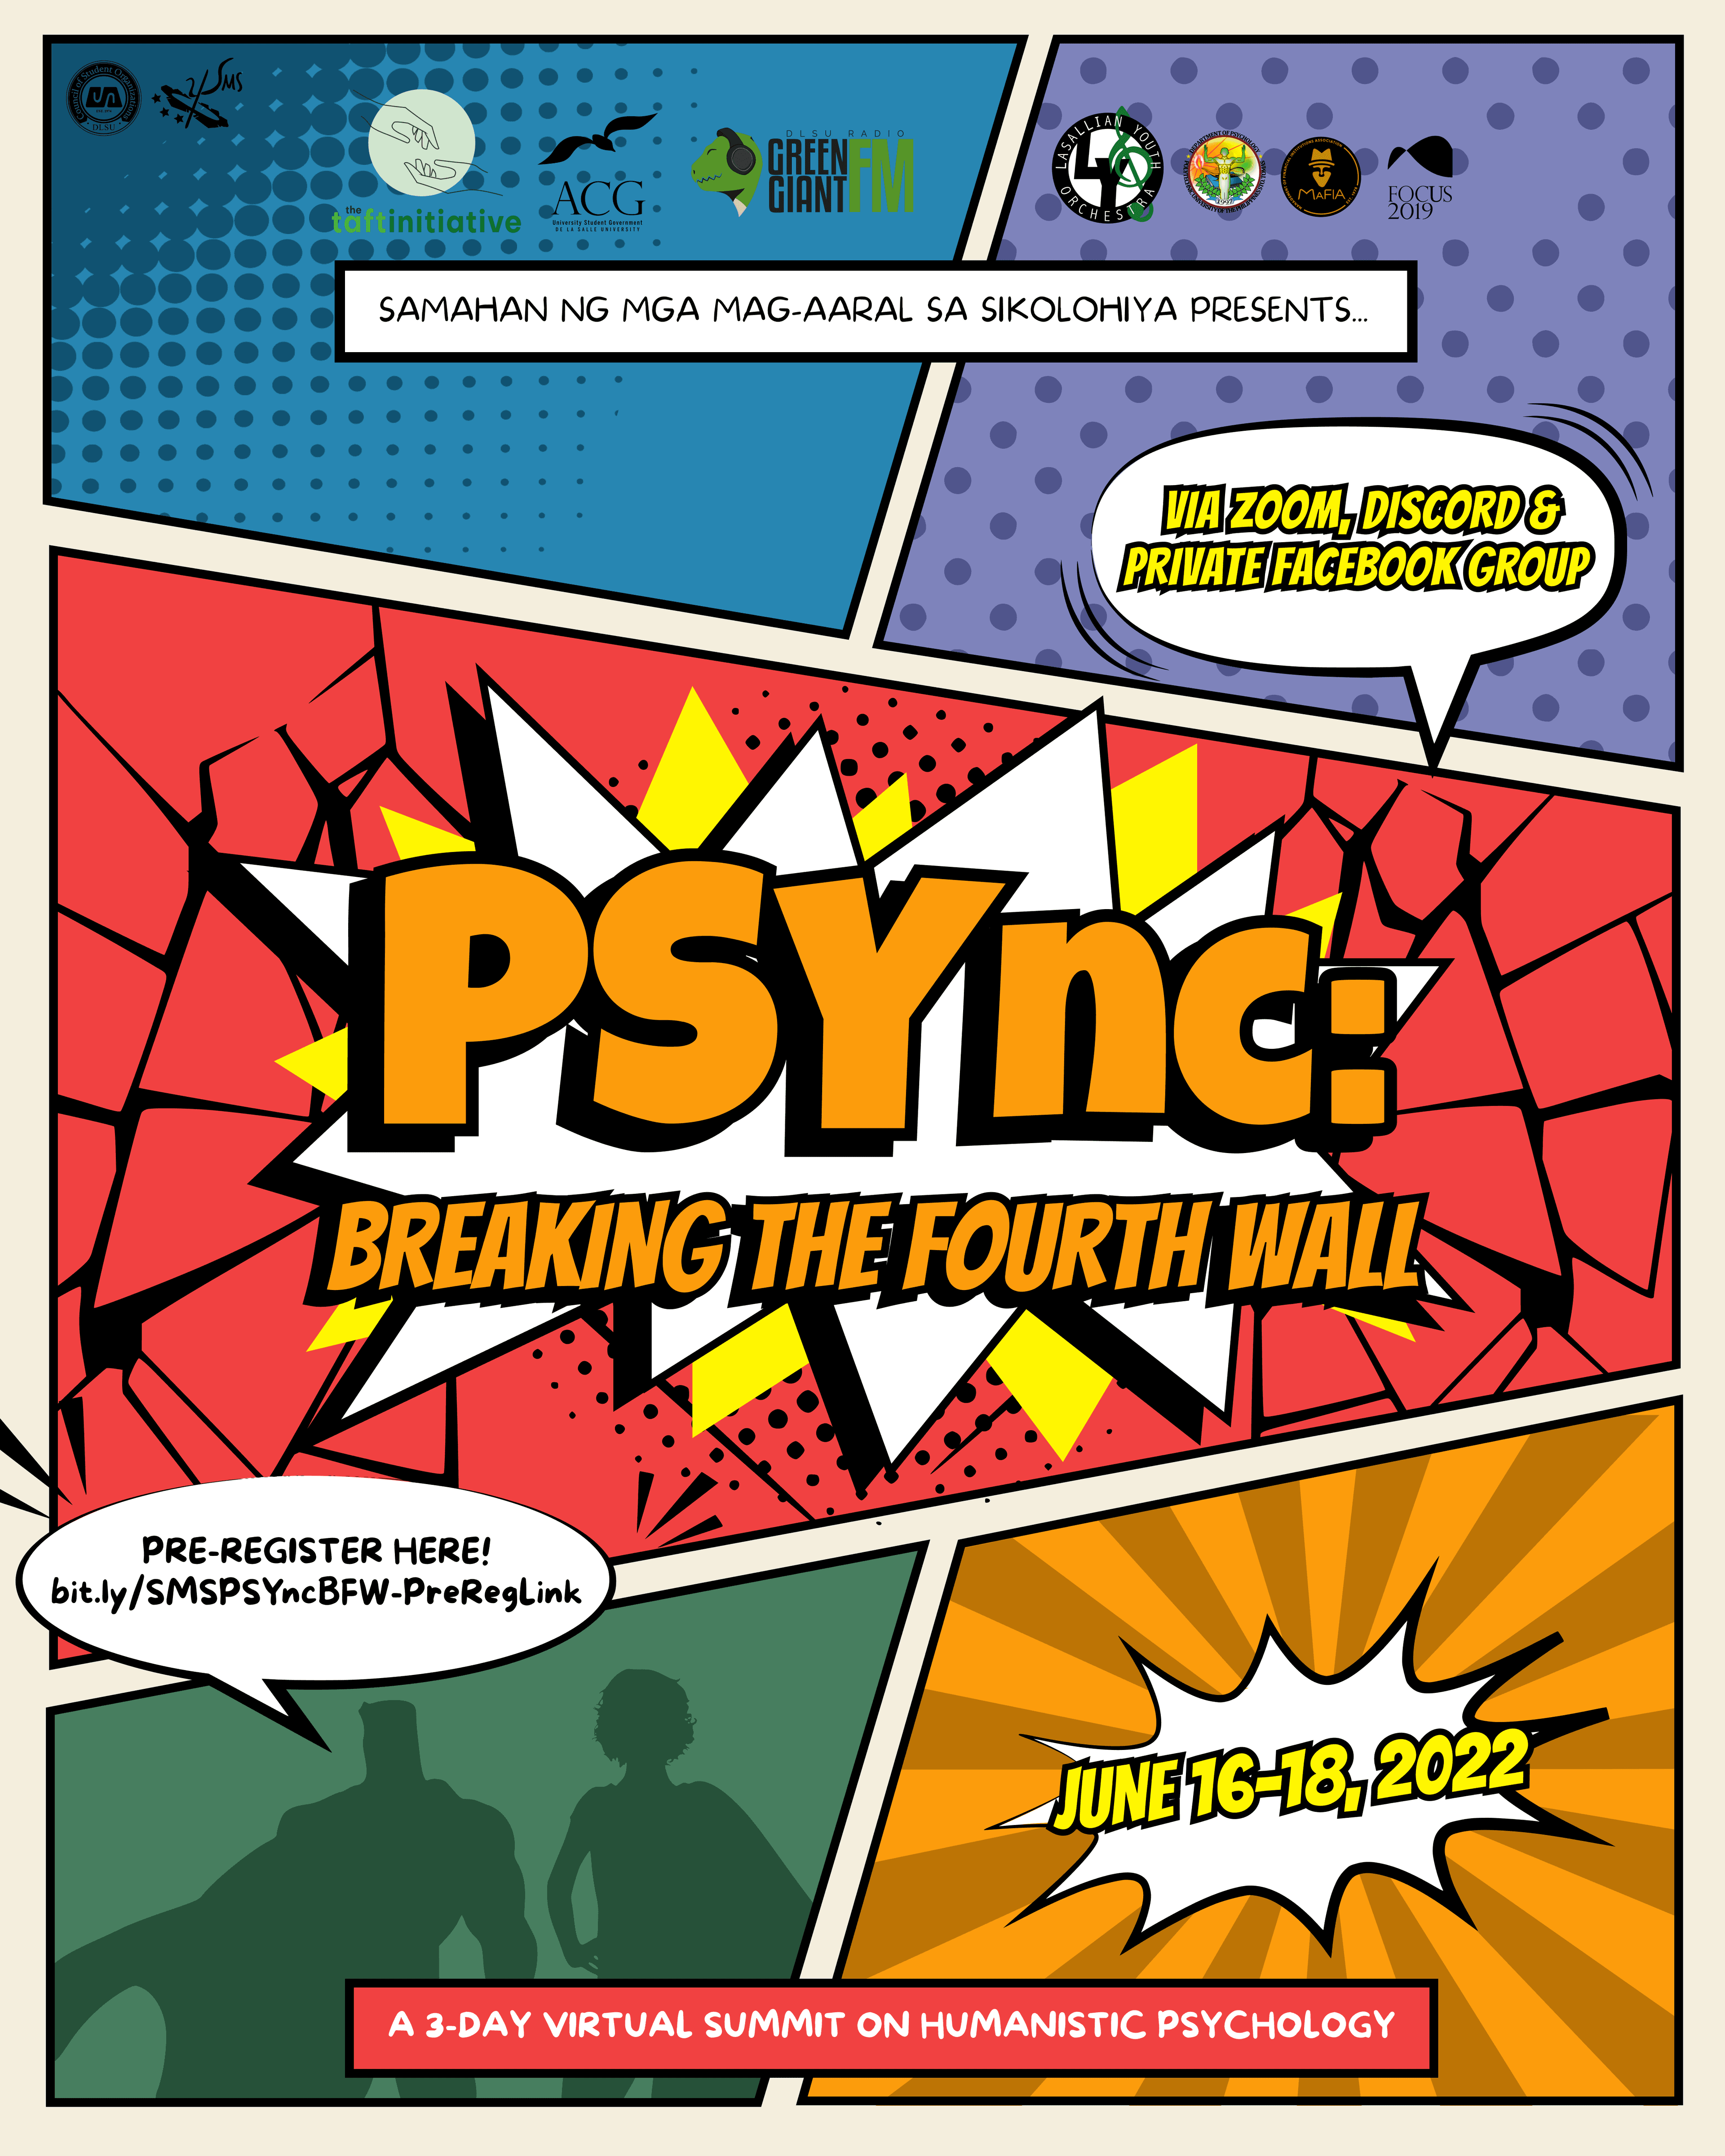 Post of PSYnc: Breaking the Fourth Wall